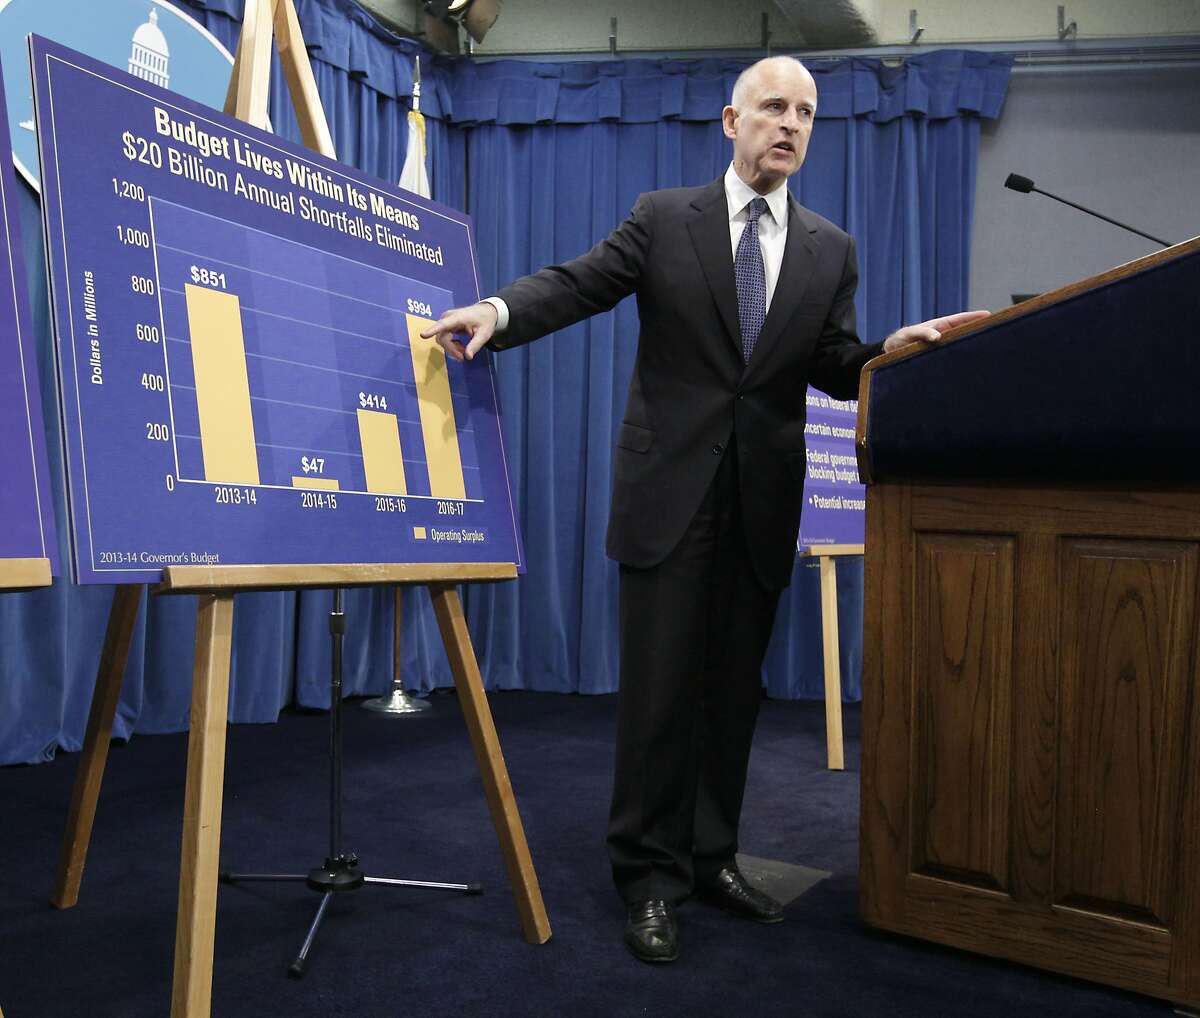 FILE -- In this Jan10. 2013 file photo Gov. Jerry Brown points to a chart showing an increase in education funding in his proposed 2013-14 state budget during a news conference at the Capitol in Sacramento, Calif. Brown will release his revised 2013-14 state budget Tuesday, but could face a battle within his own party over what to do with an additional $4.5 billion. While he has pledged to maintain fiscal restraint and build a cash reserve, he faces pressure from Democrats who want to spend the additional revenue to make up for years of budget cuts to programs serving women, children and the poor. (AP Photo/Rich Pedroncelli, file)